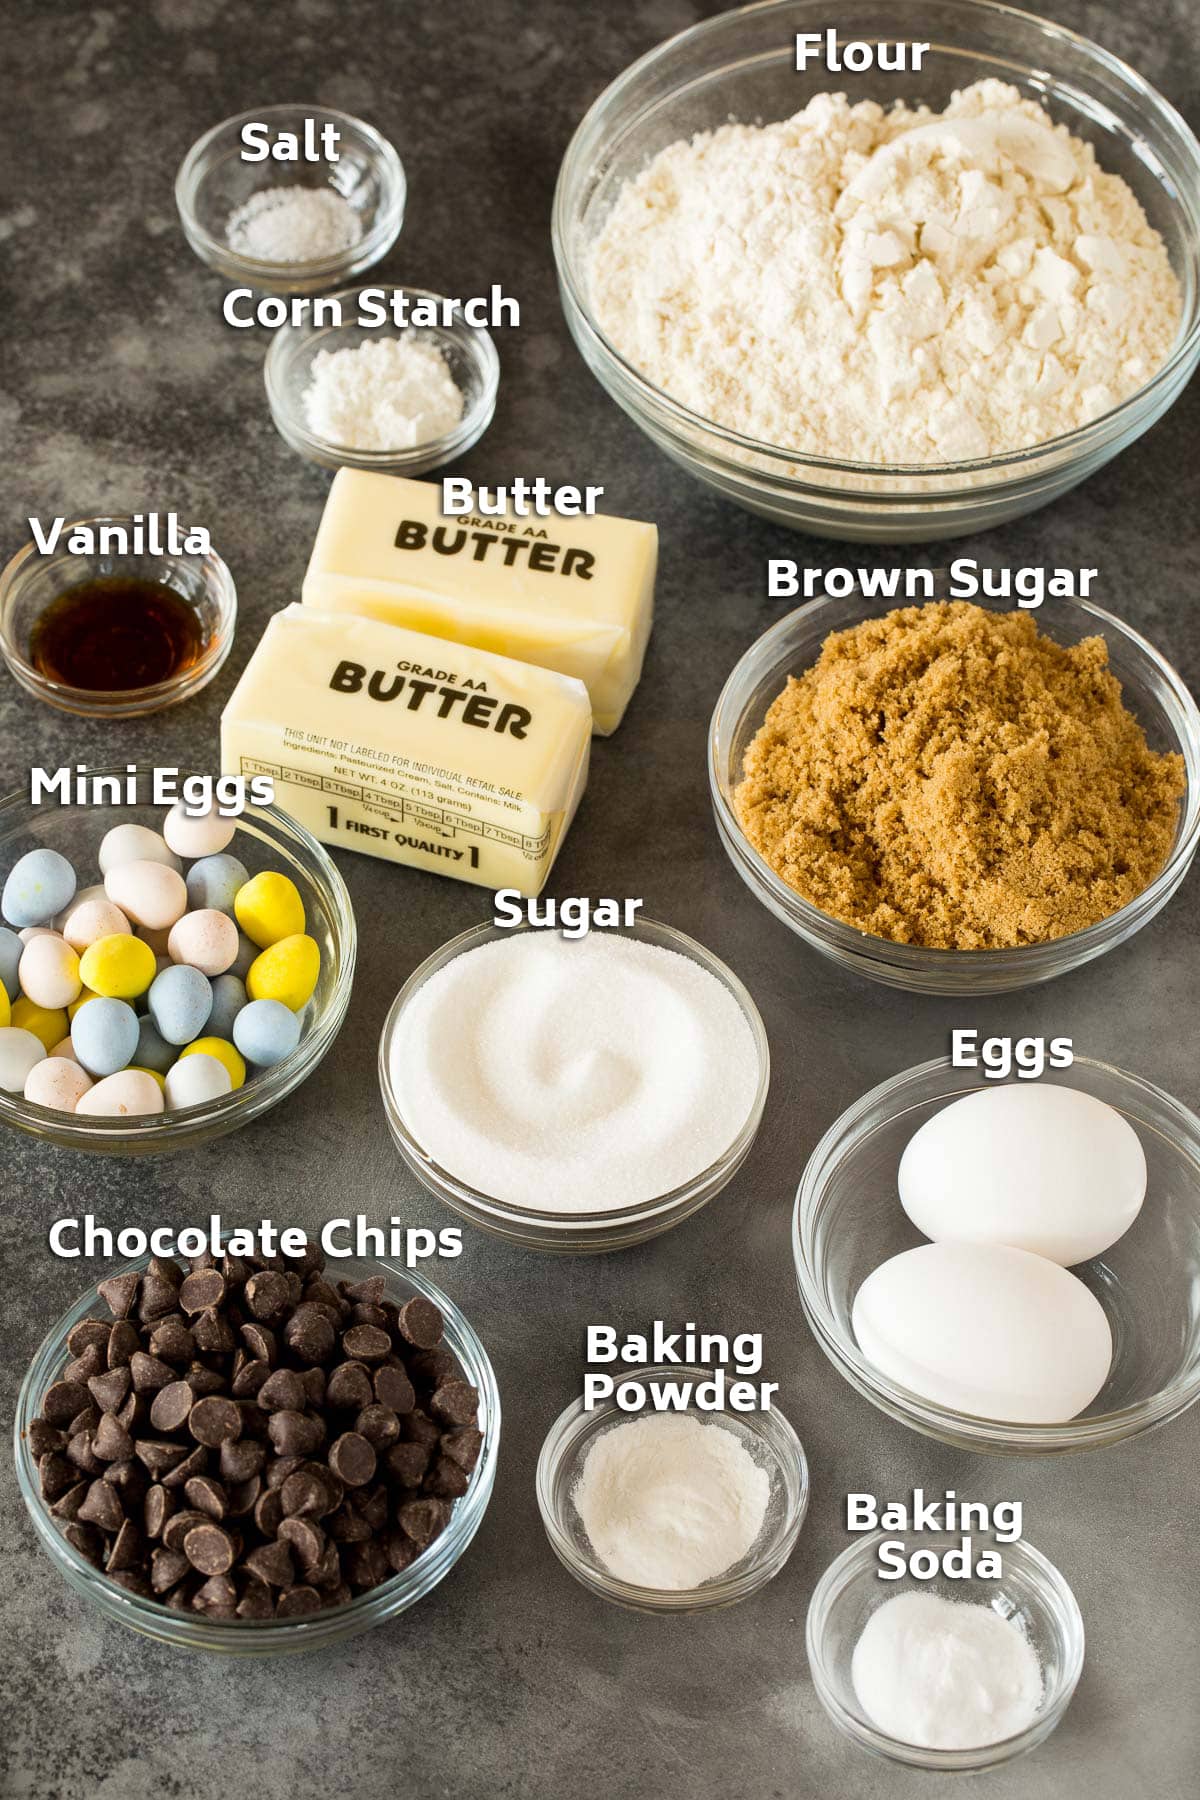 Ingredients including butter, flour, sugar, brown sugar, eggs and chocolate.